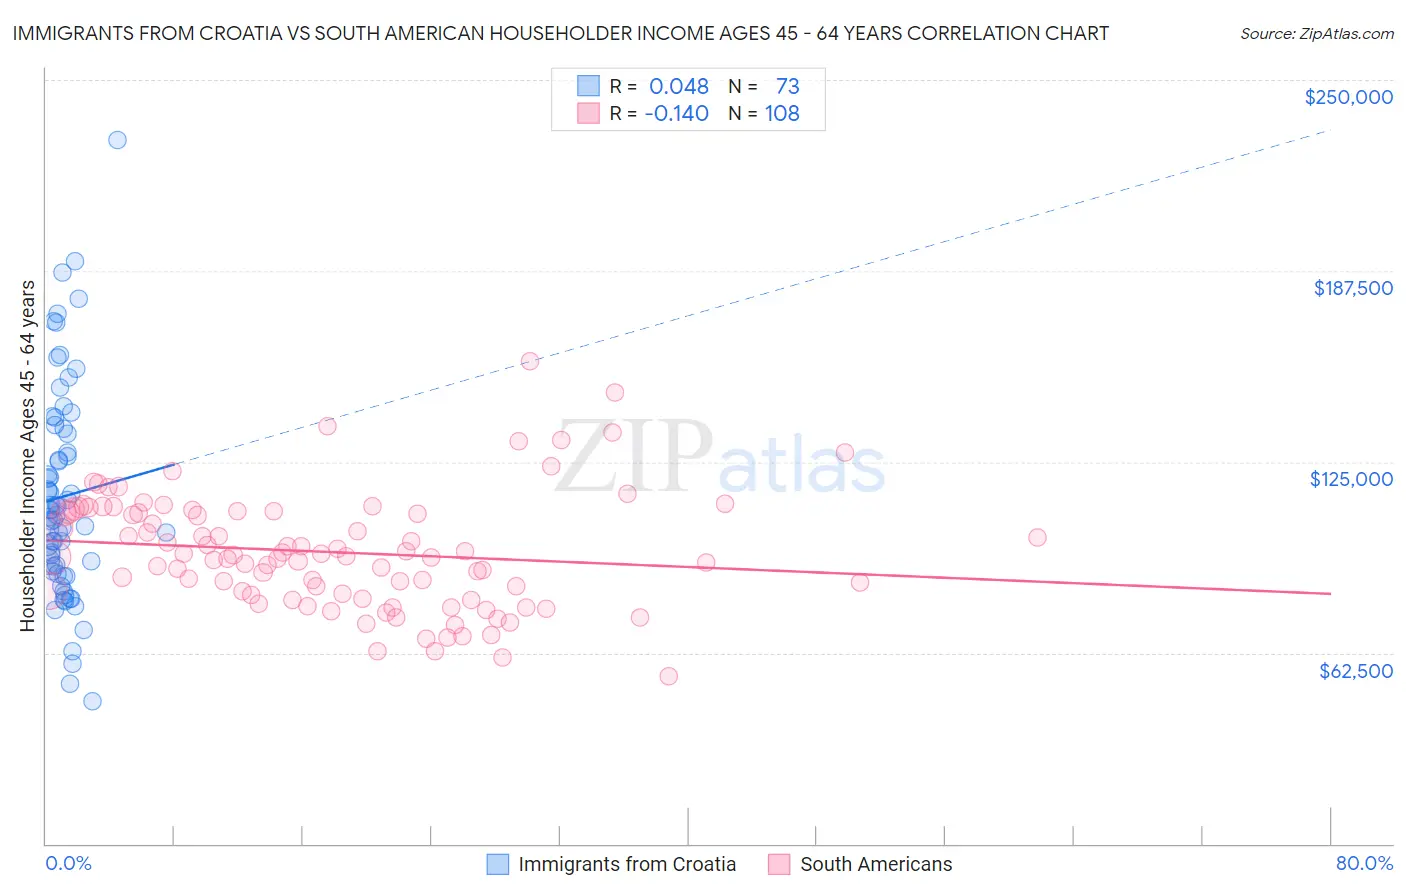 Immigrants from Croatia vs South American Householder Income Ages 45 - 64 years